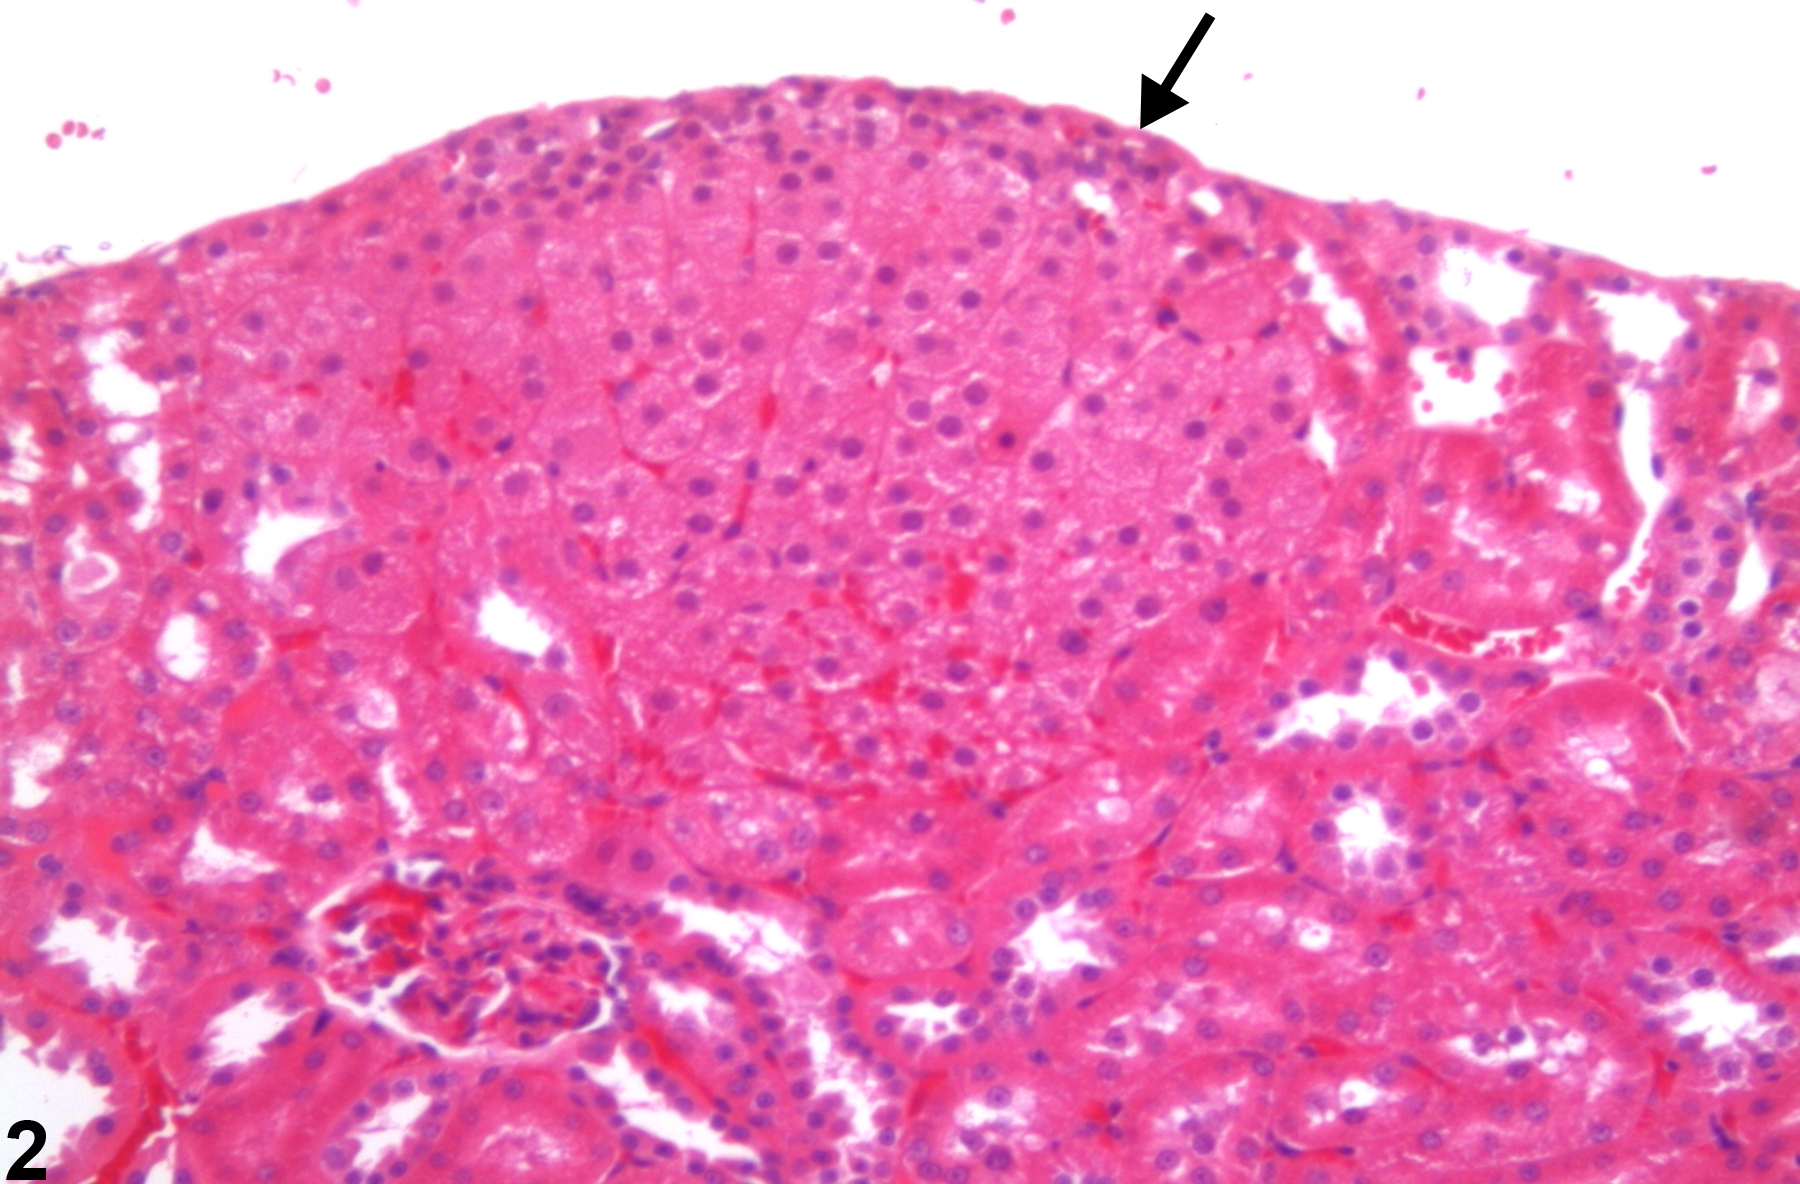 Image of ectopic adrenal tissue in the kidney from a  Harlan Sprague-Dawley rat in a  study